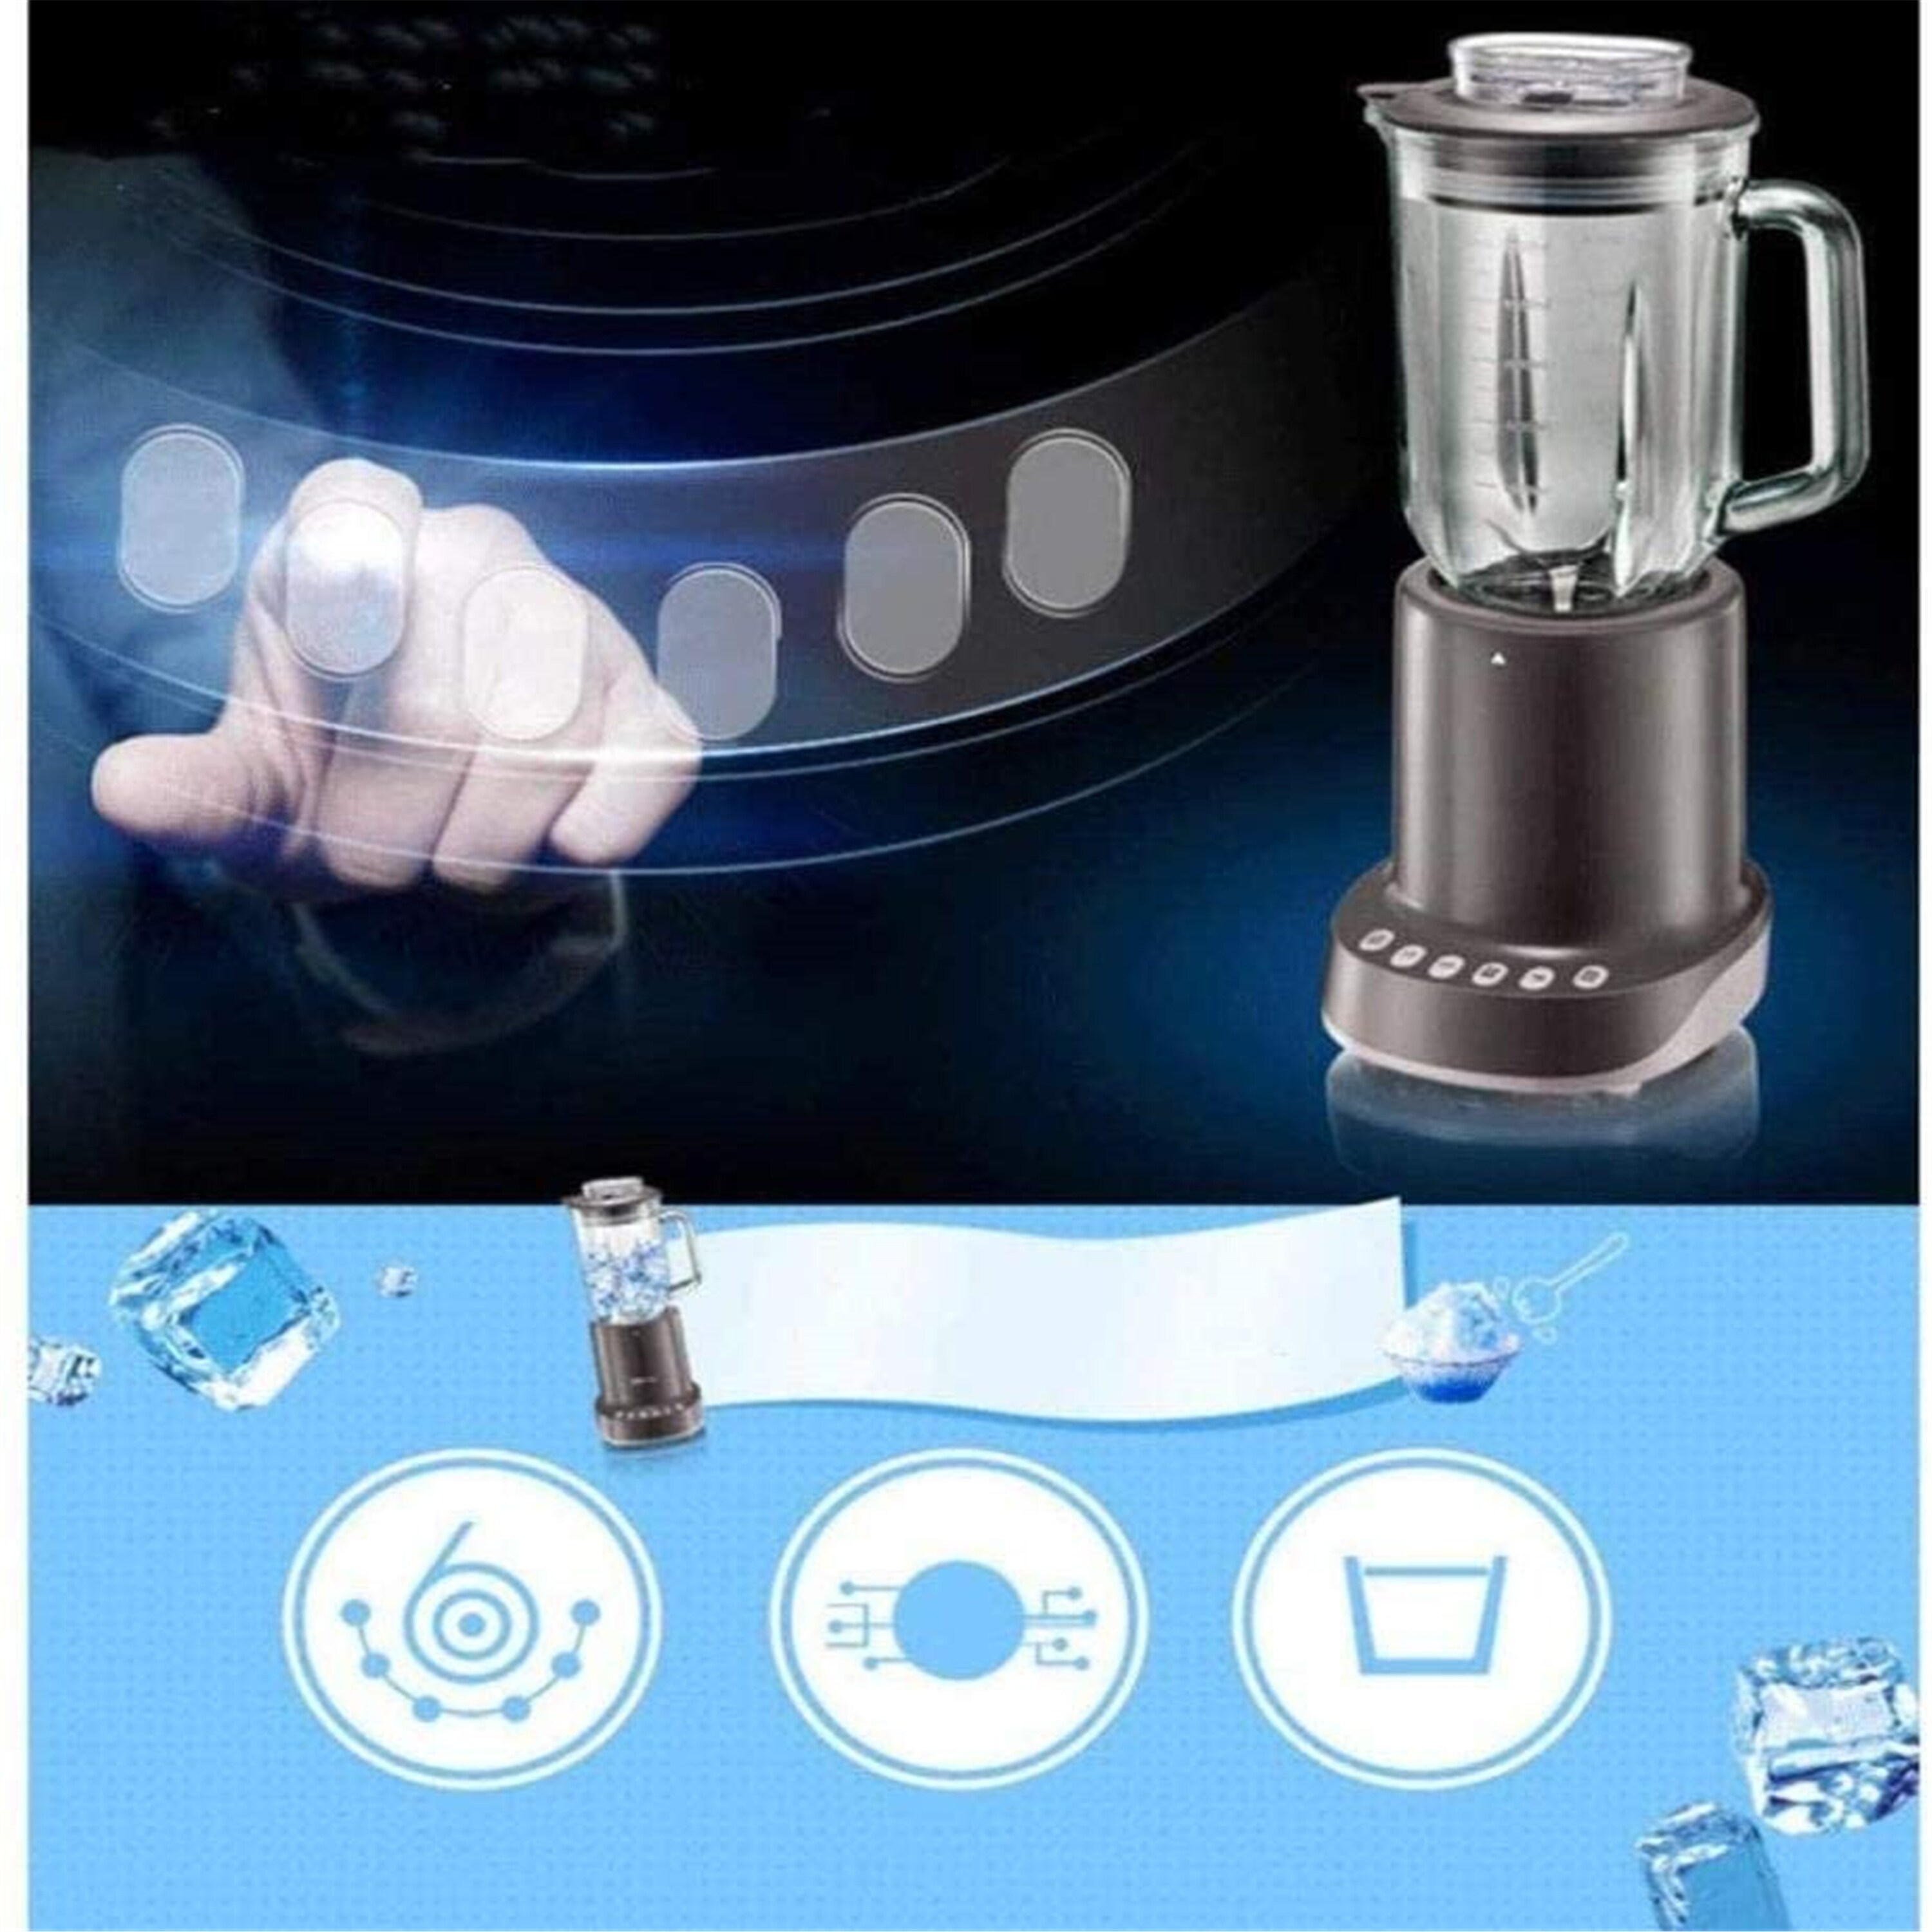 https://ak1.ostkcdn.com/images/products/is/images/direct/25df241dcda9abaef2ed2bc0e7a775e516ce3501/Intelligent-Multifunctional-Appliances-Juice-Blender-Electric-Juicer.jpg